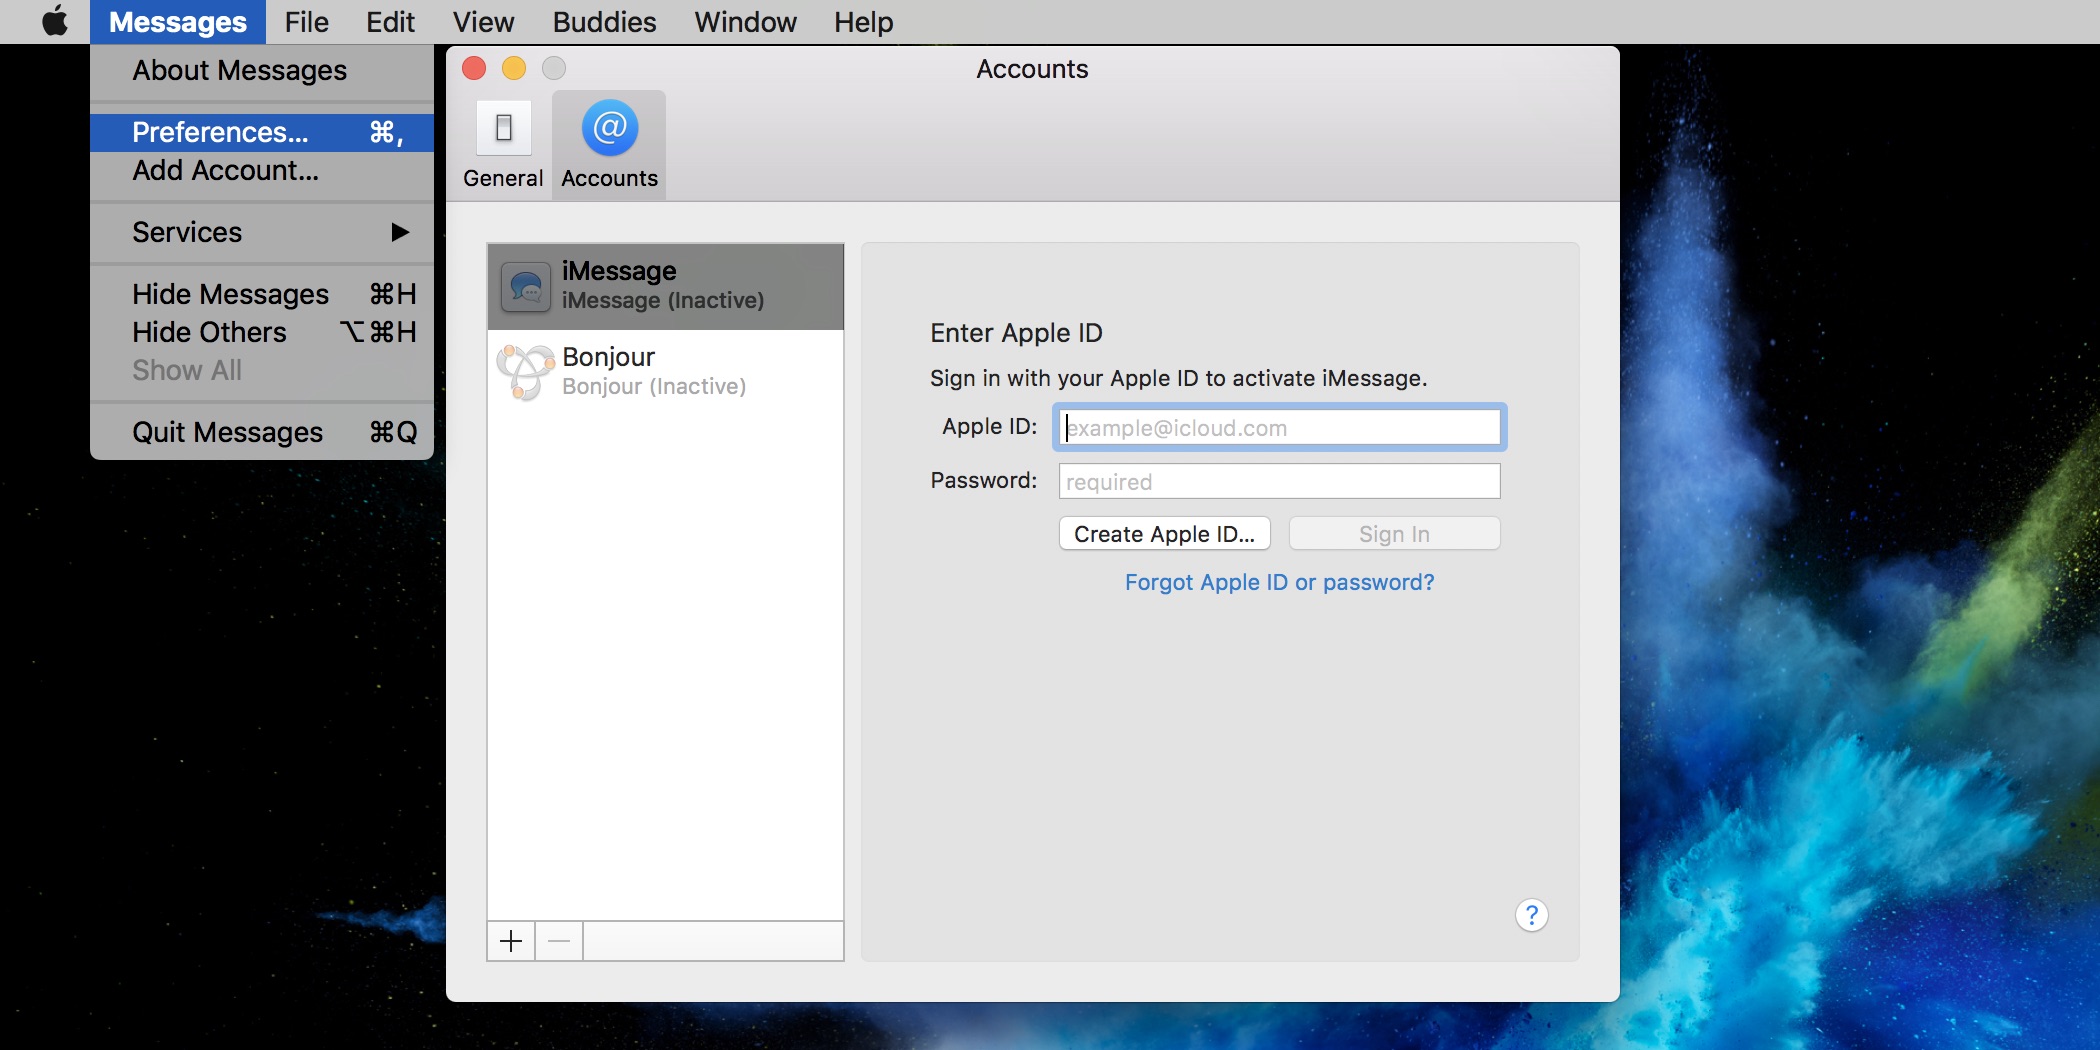 why do i not have sms text fowarding option for my new mac